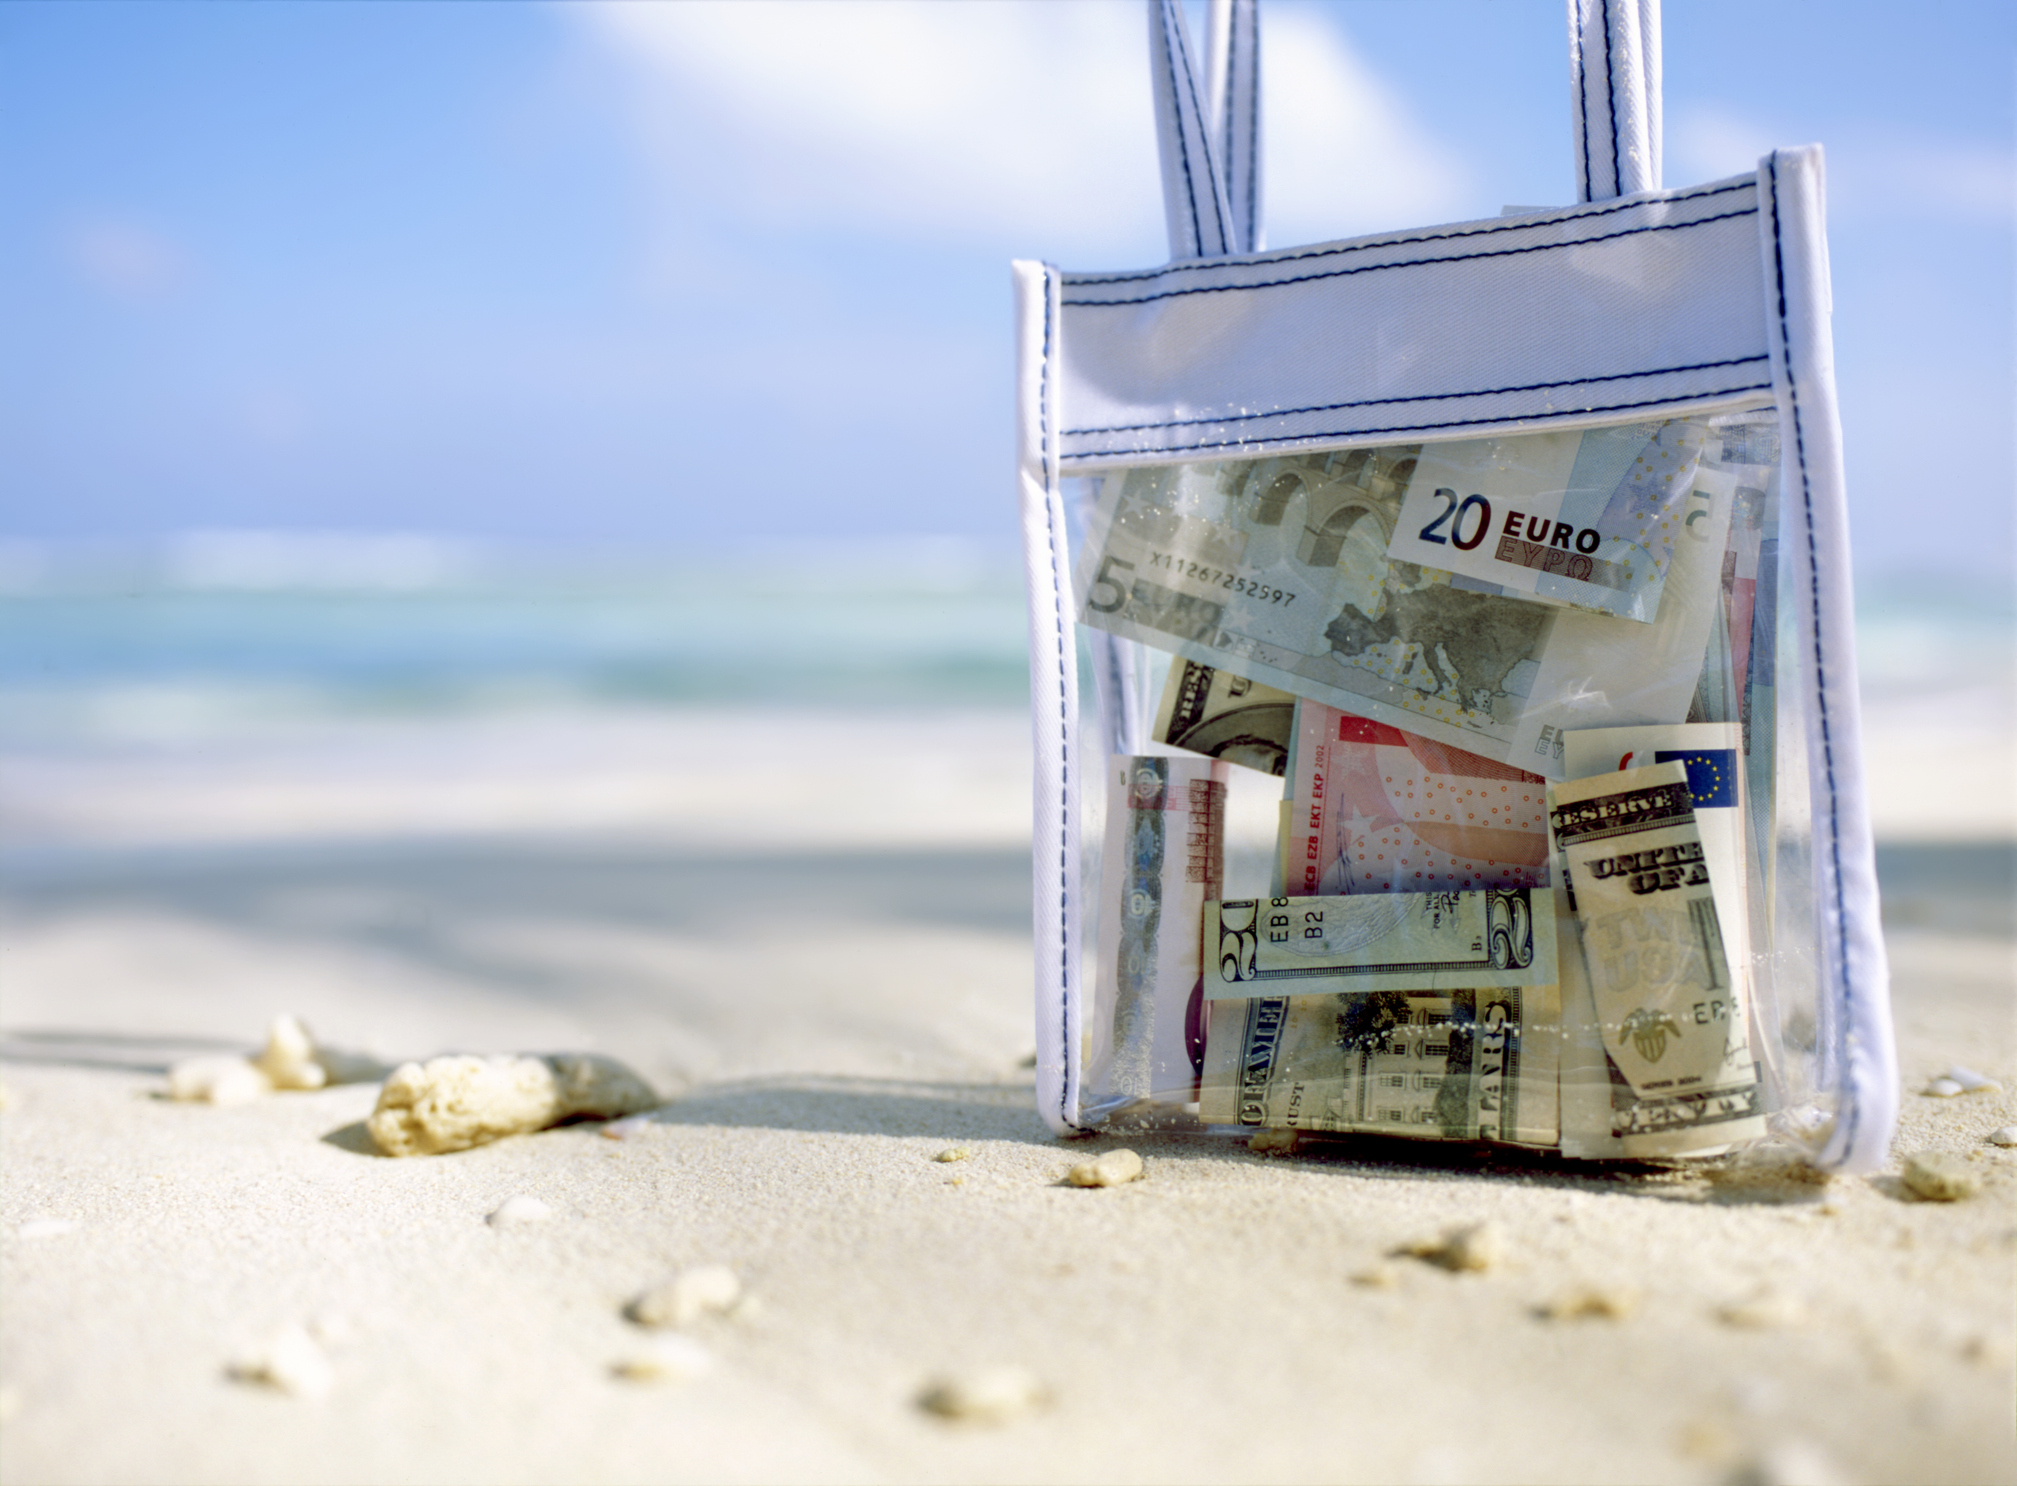 Transparent bag with money and postcards on a sandy beach, travel concept